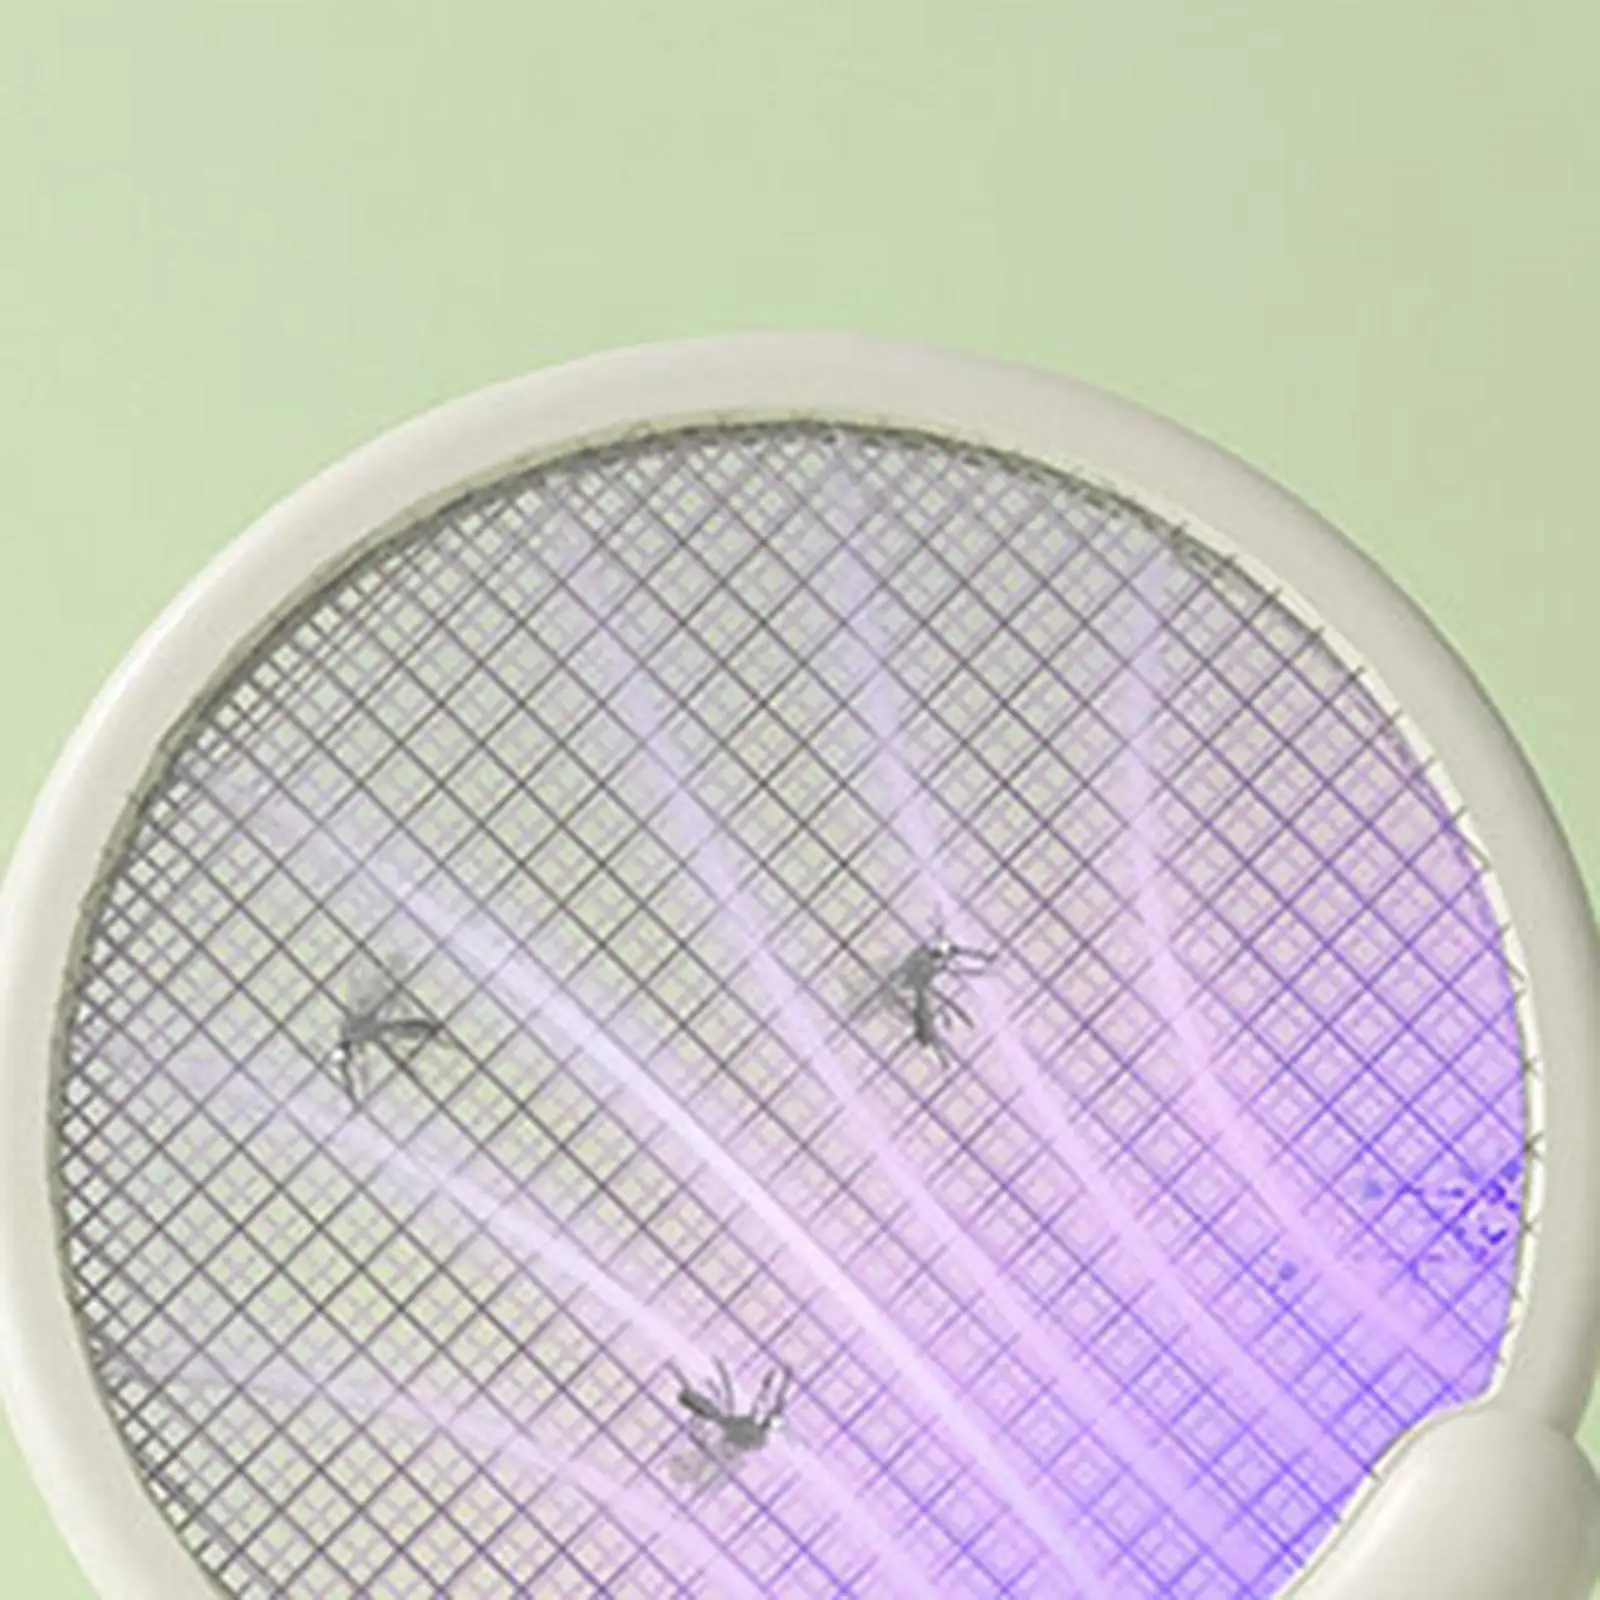 3500V Electric Fly Swatter Racket Flying Bugs Trap USB Rechargeable Smart Bug Zapper for Patio Backyard Home Office Bedroom